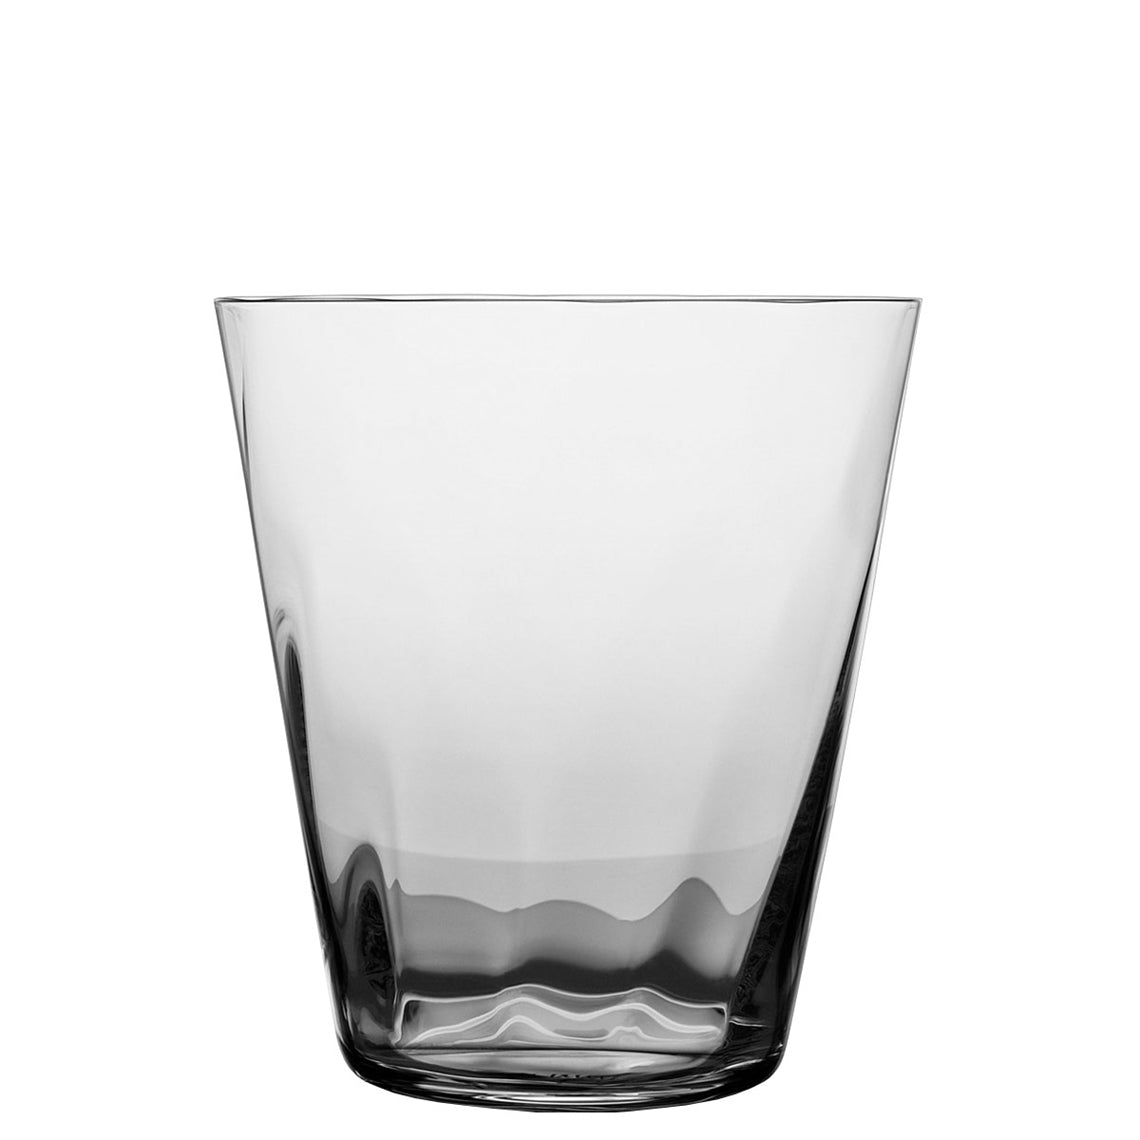 W1 Coupe Glass - Effect, Set of 2